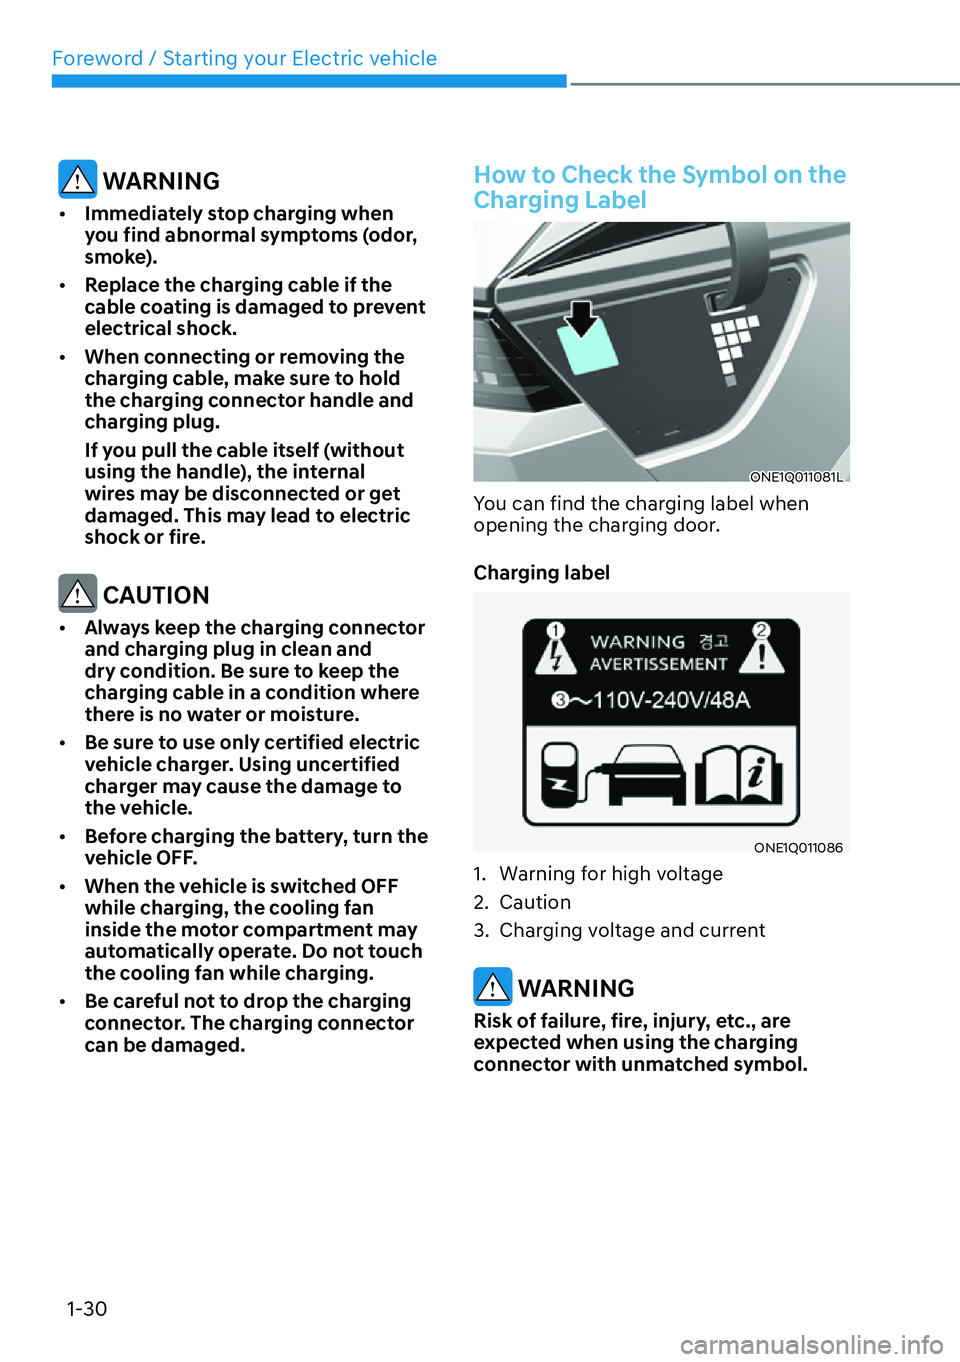 HYUNDAI IONIQ 5 2022  Owners Manual Foreword / Starting your Electric vehicle
1-30
 WARNING
[�Immediately stop charging when 
you find abnormal symptoms (odor, 
smoke). 
[�Replace the charging cable if the 
cable coating is damaged 